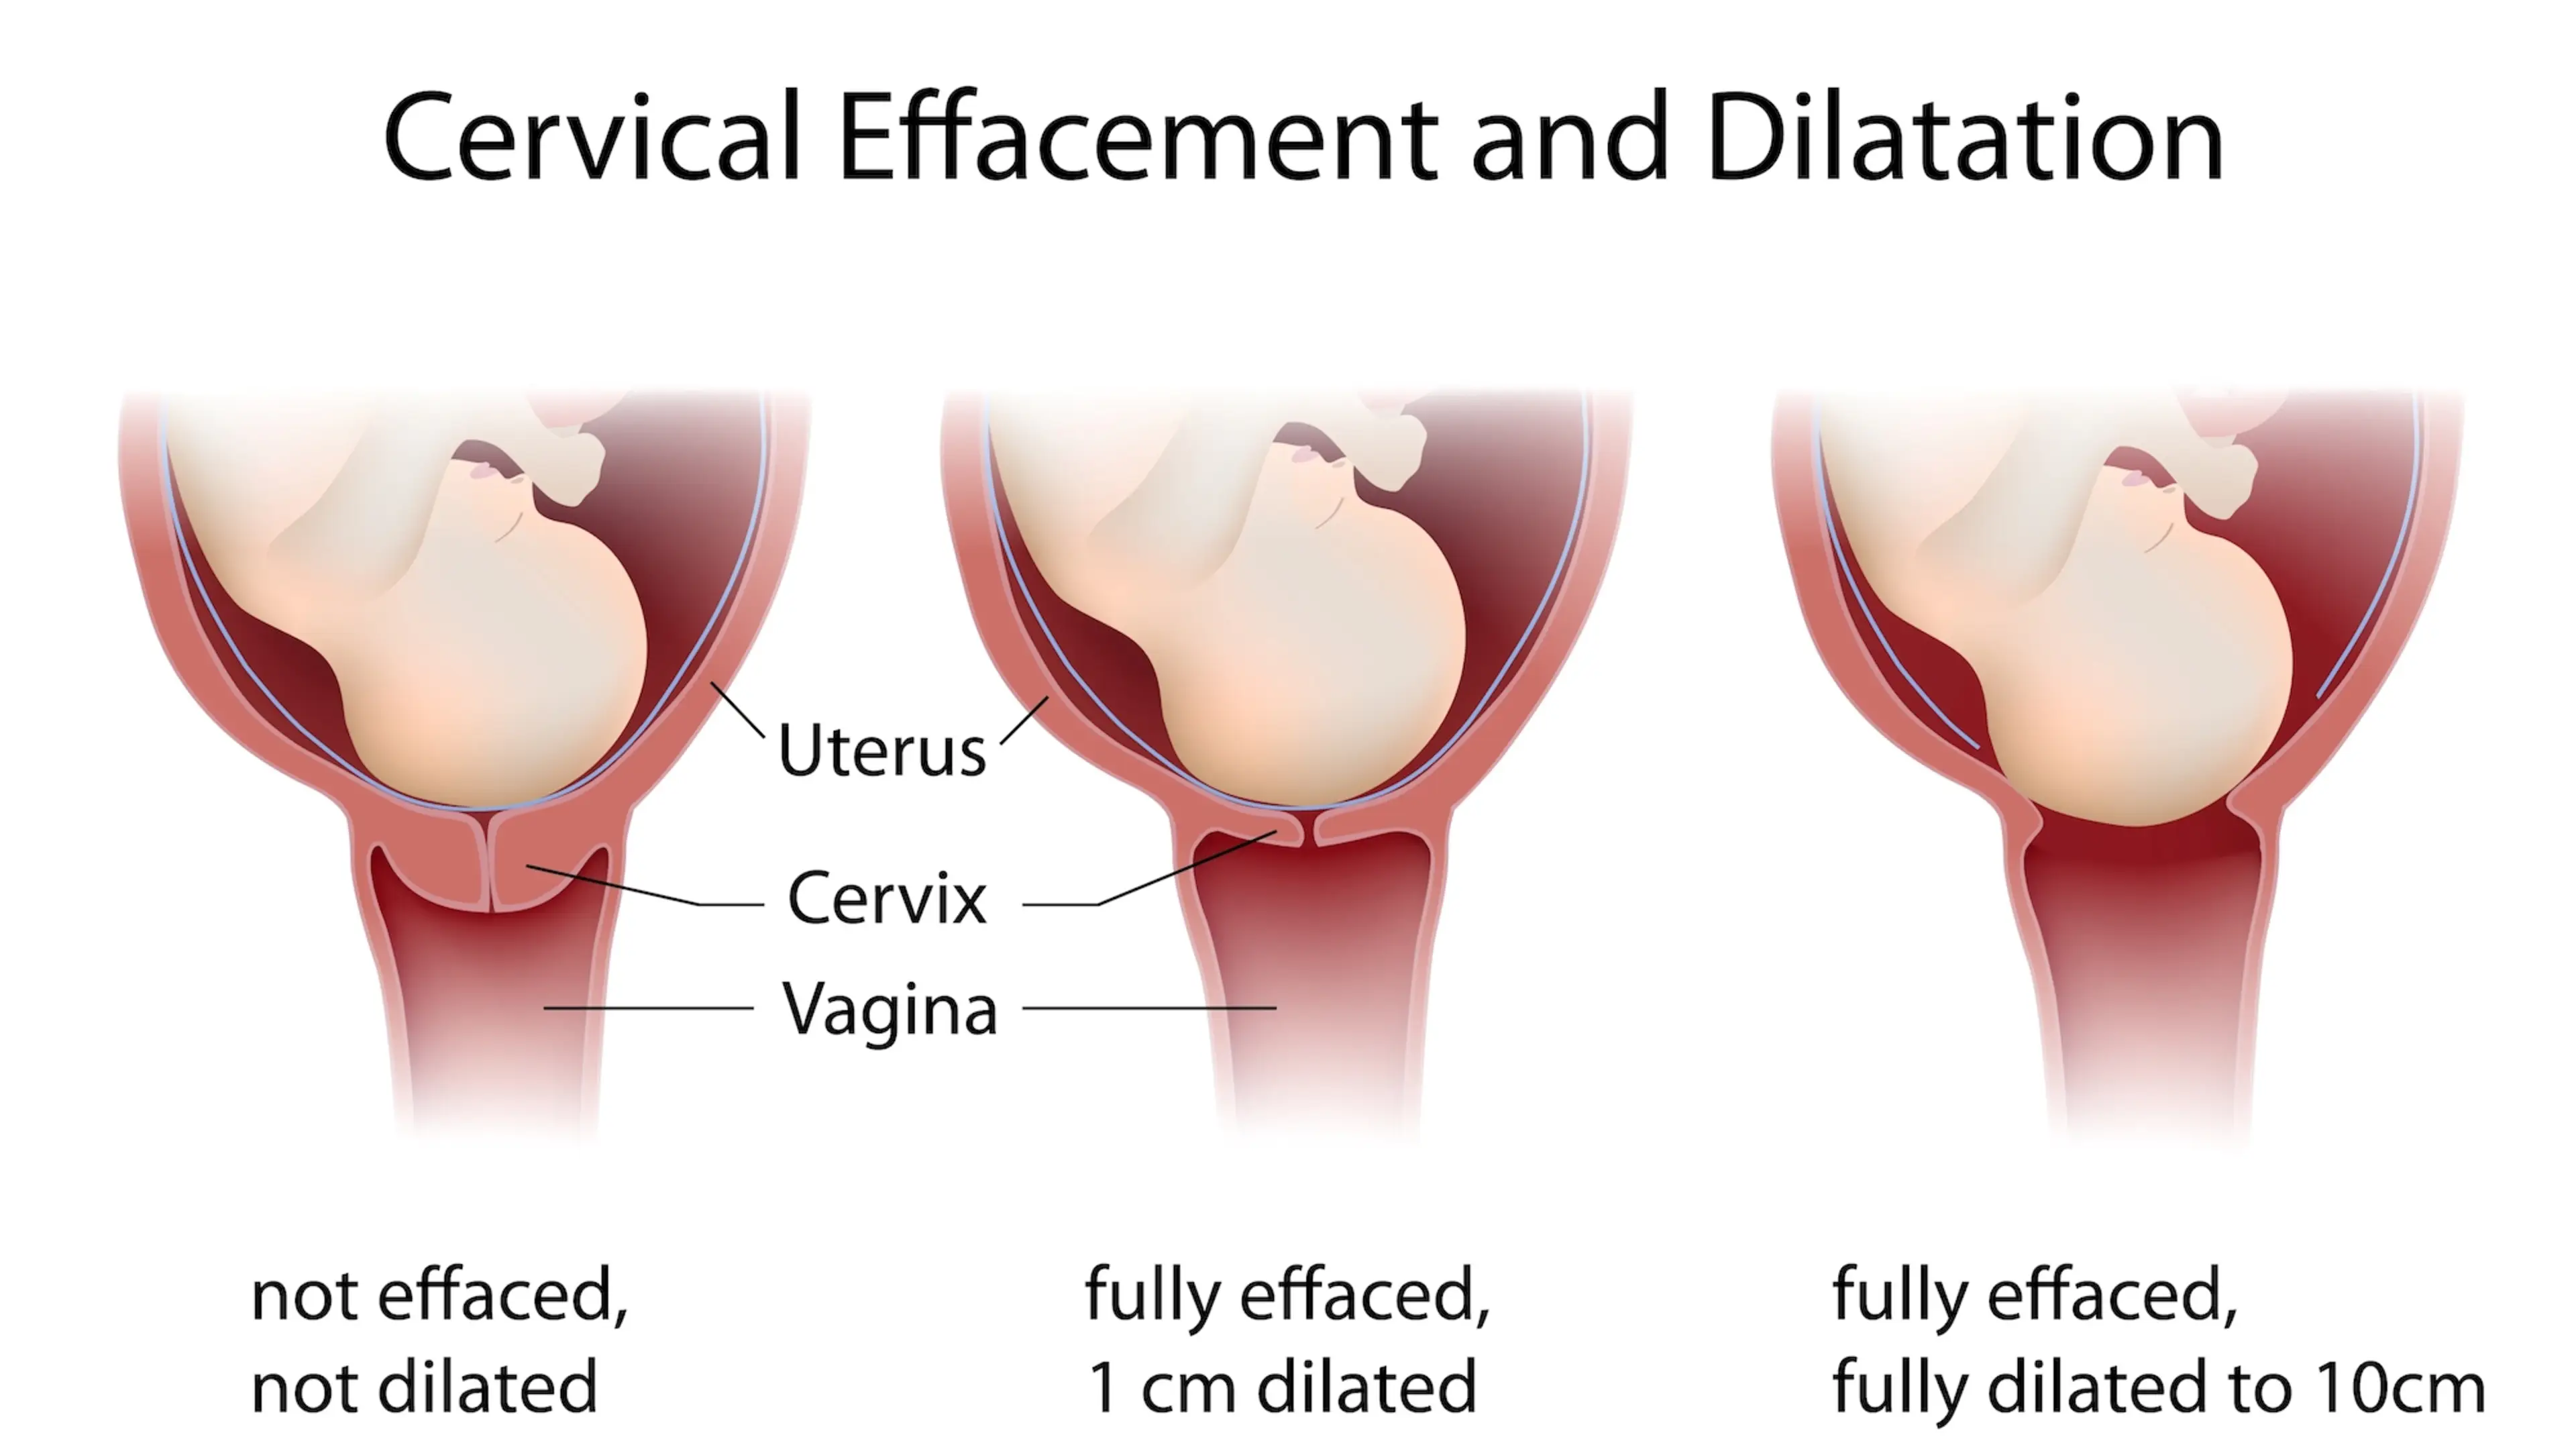 cervix not dilated, 1cm dilated and fully dilated